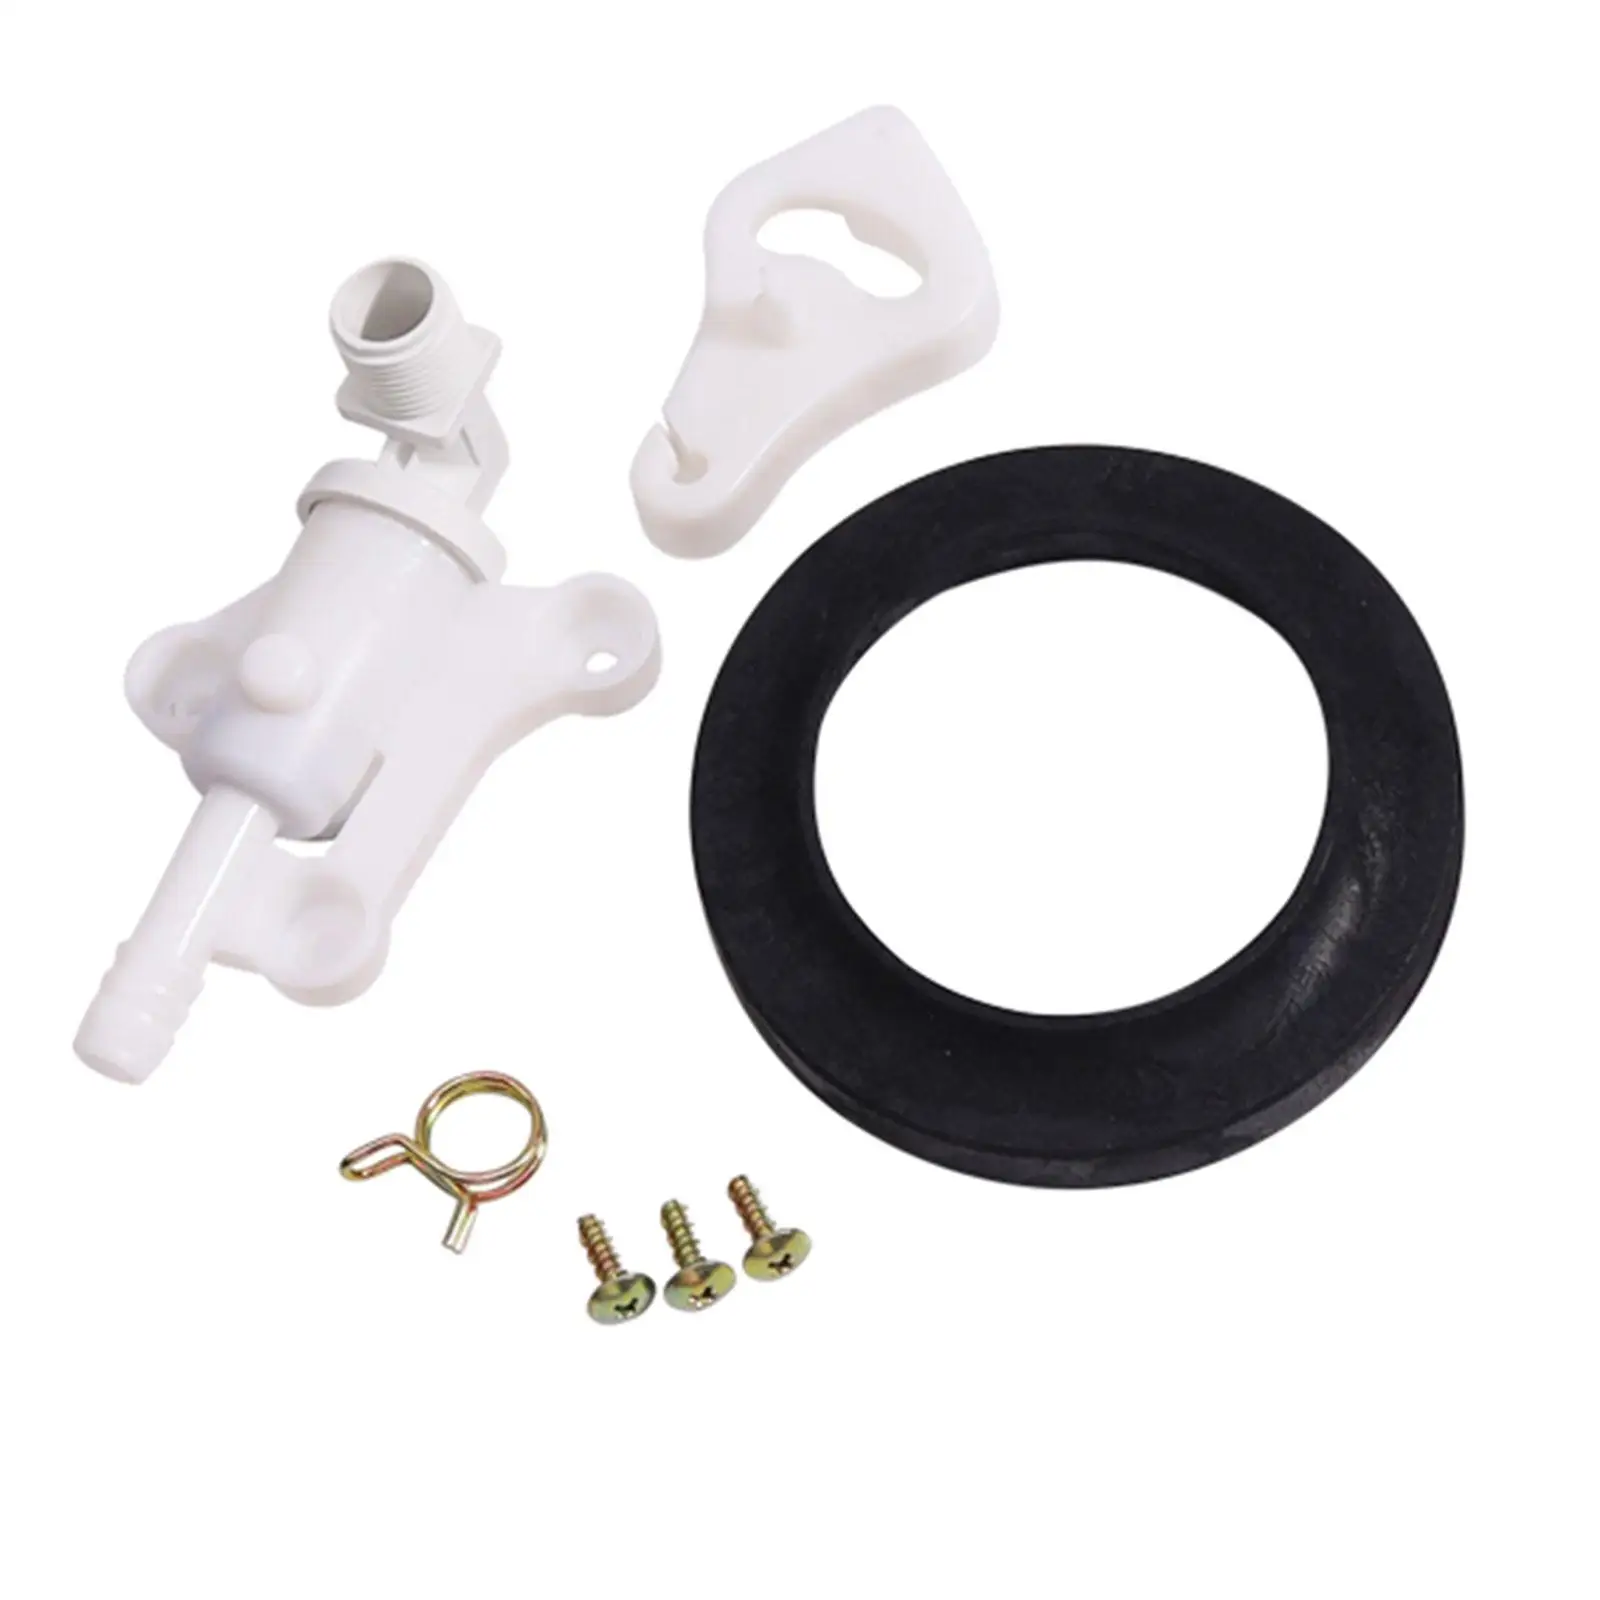 34100 Water Valve with Seal for Style Plus Toilets RV Toilet Valve with RV ball Seal Replace Parts for Durable